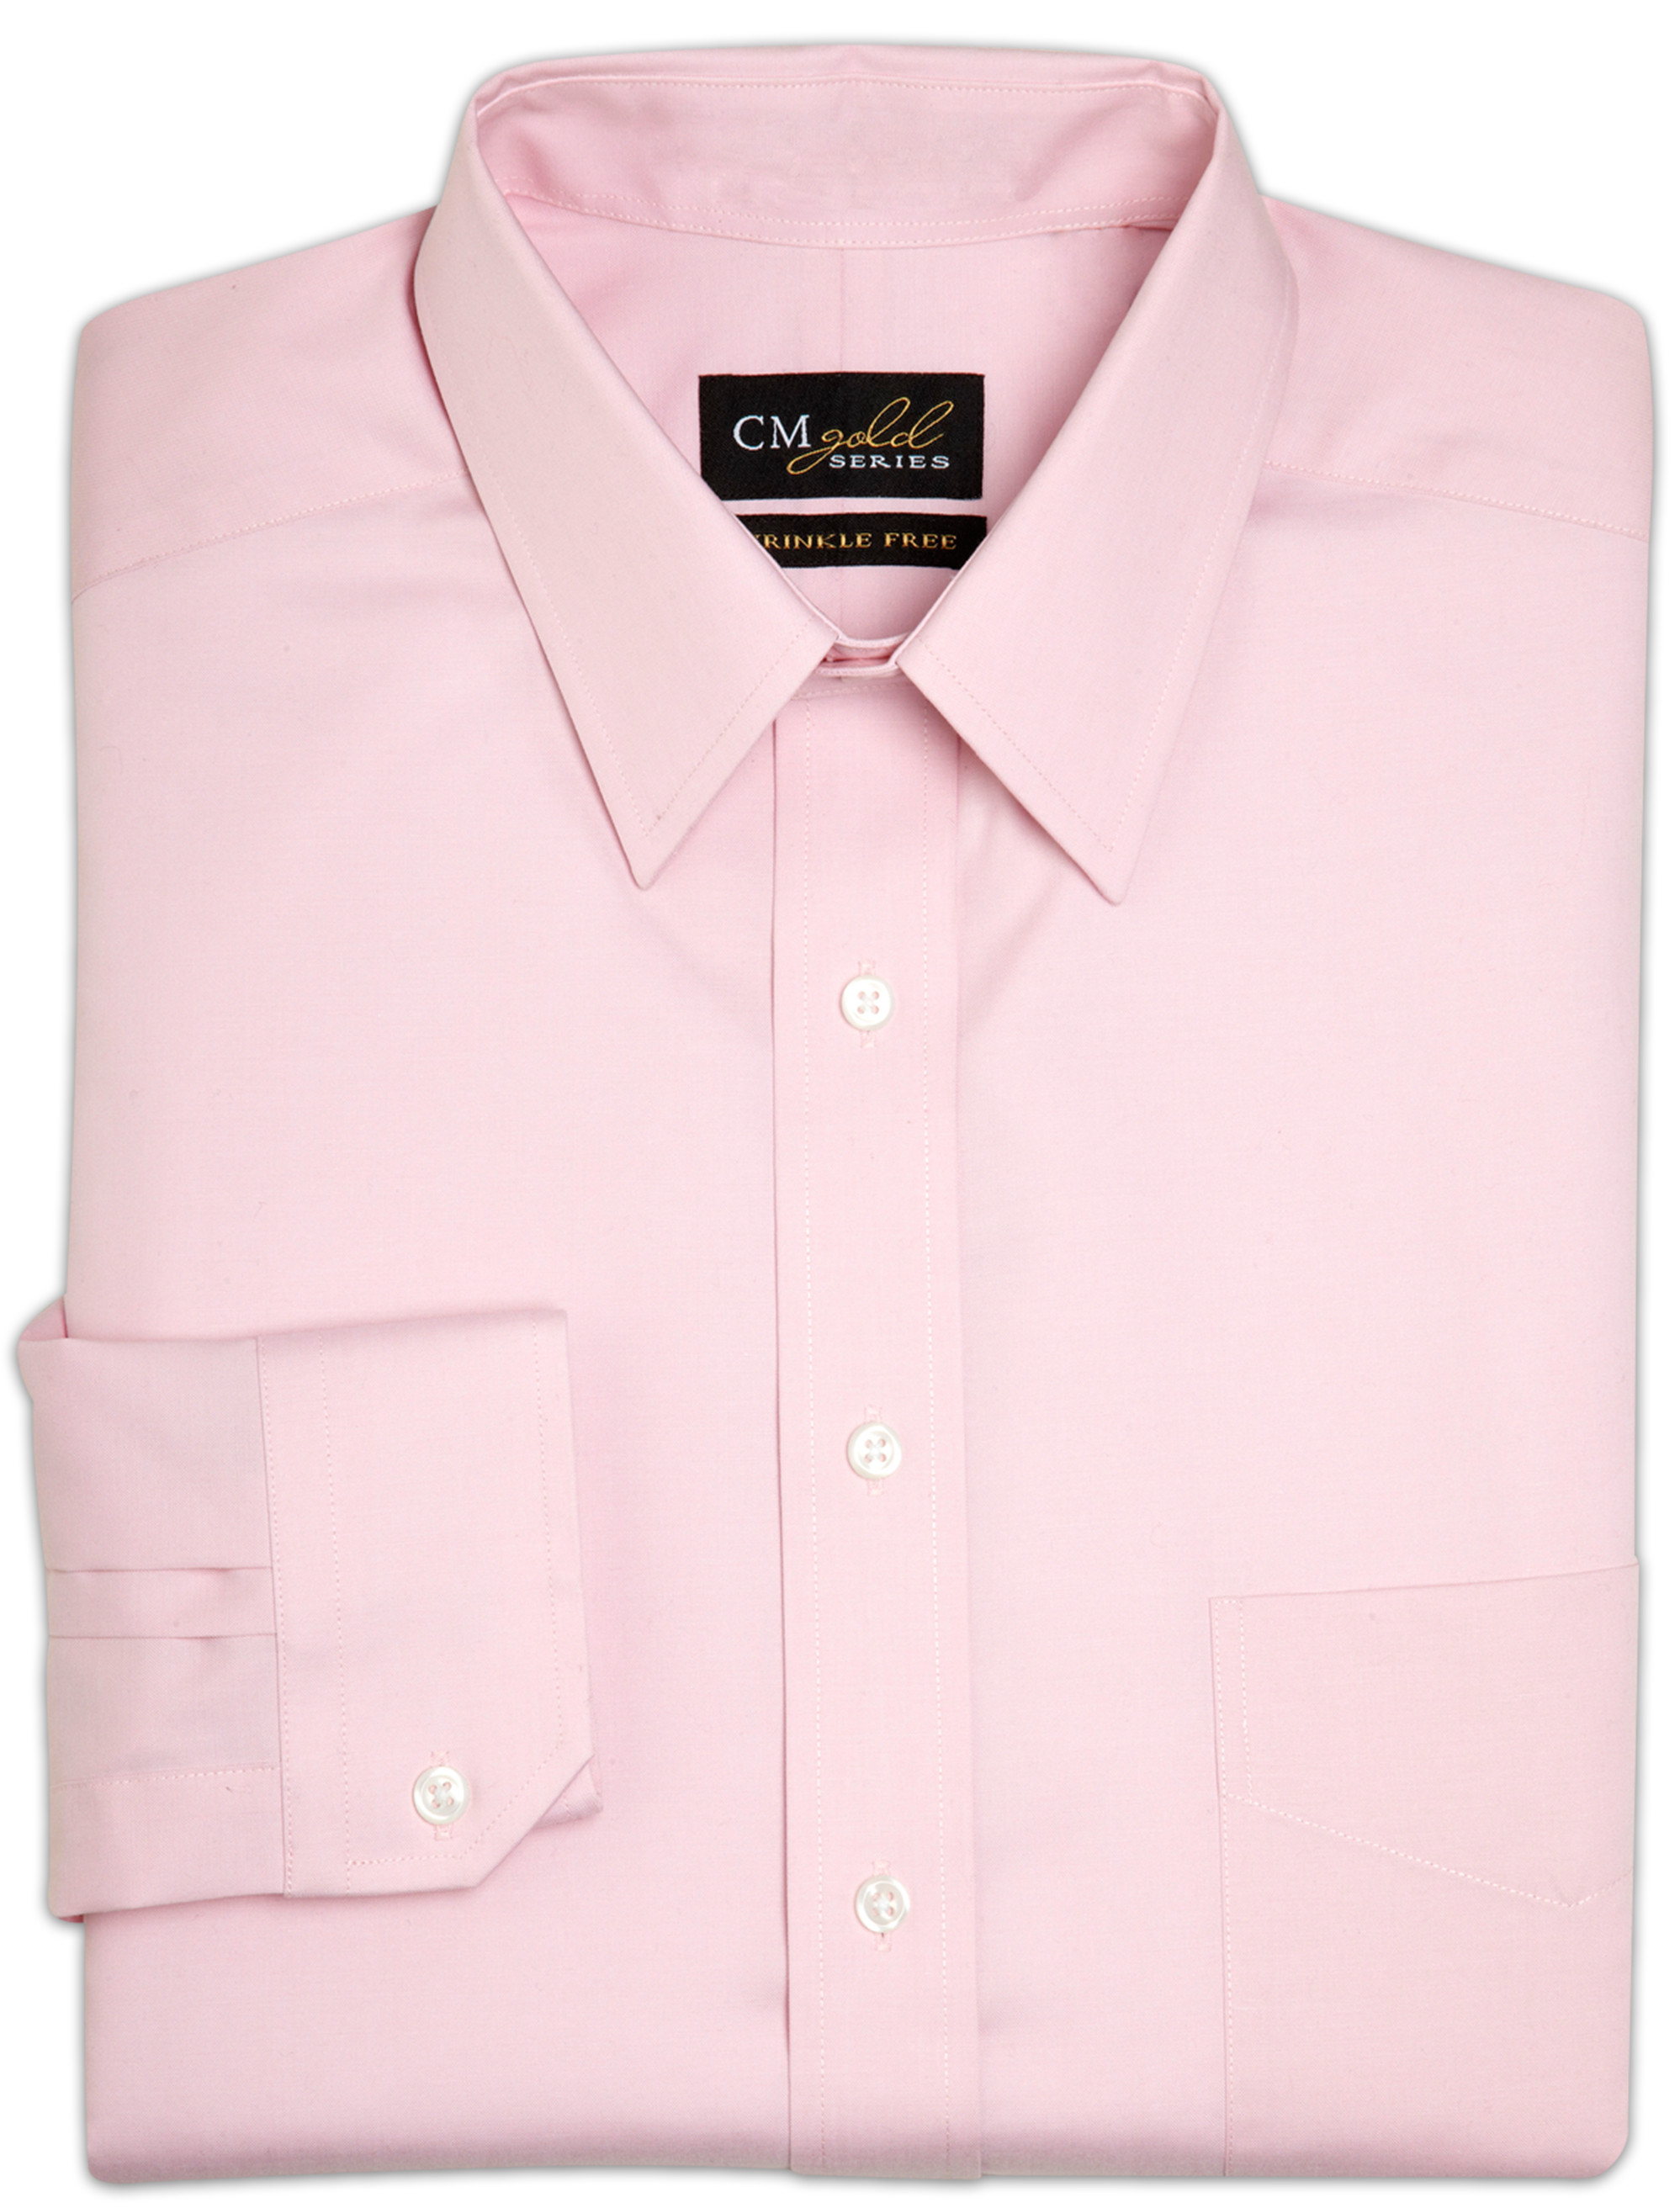 Gold Series Neck-Relaxer Broadcloth Dress Shirt | Dress Shirts from ...